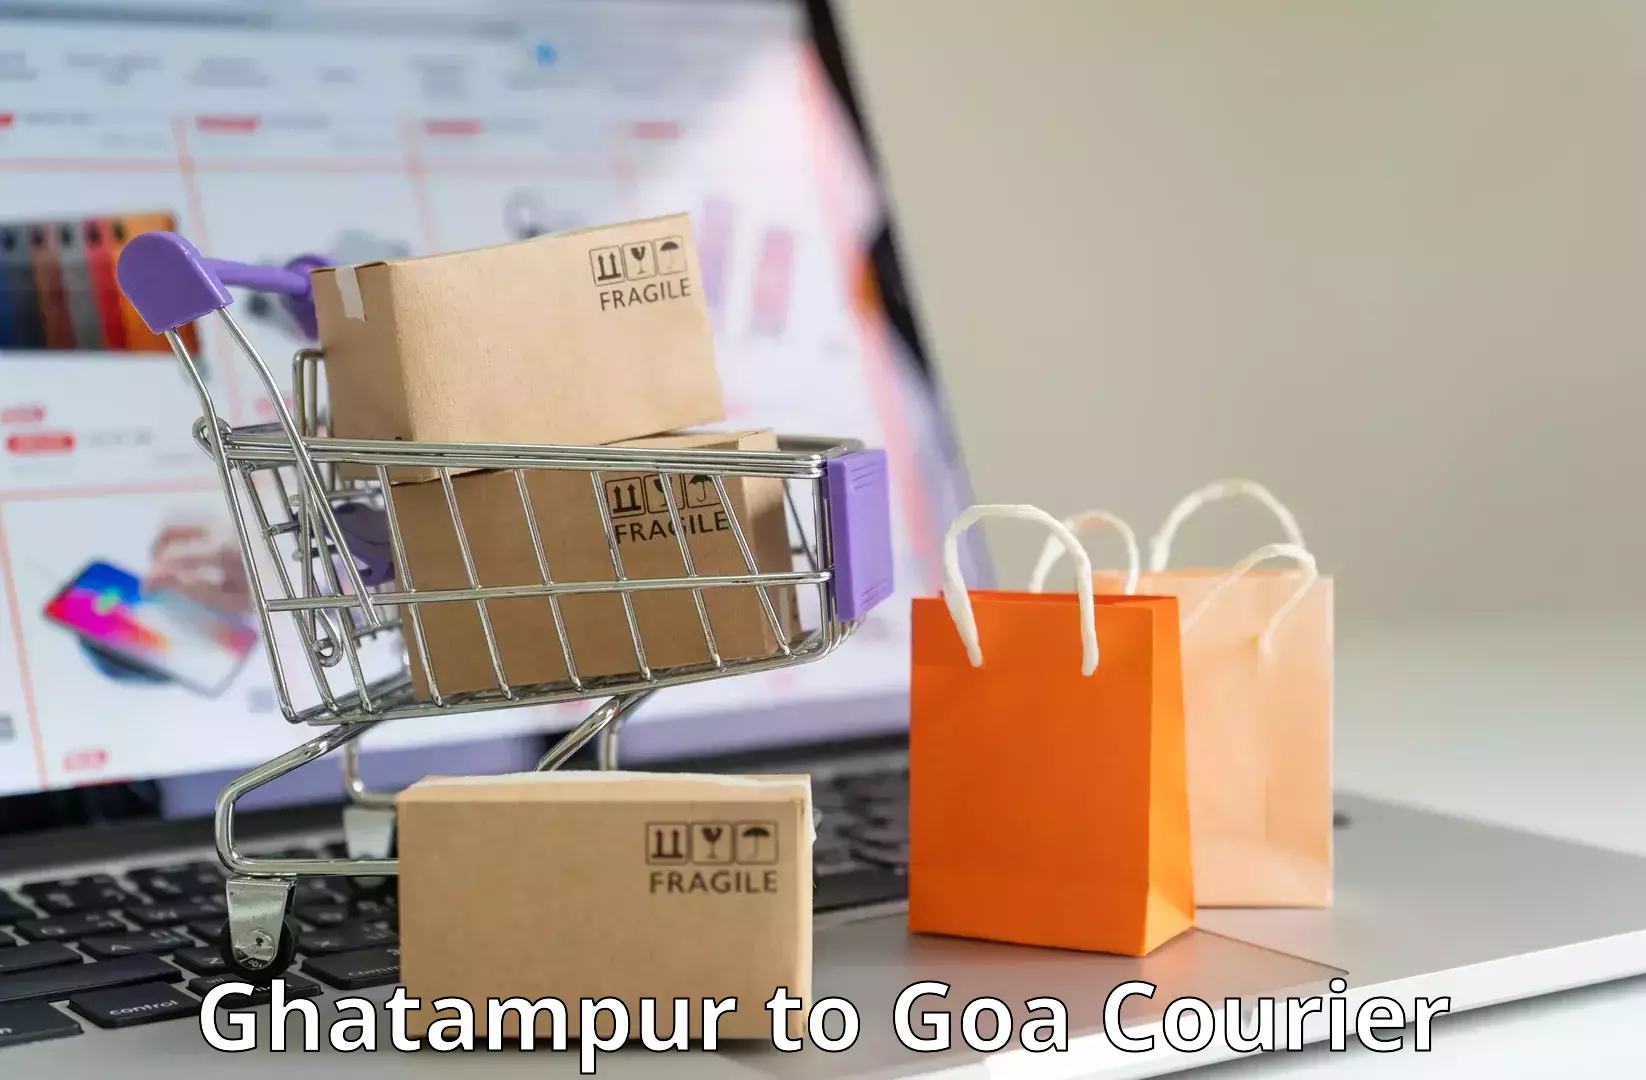 Customer-focused courier Ghatampur to Goa University